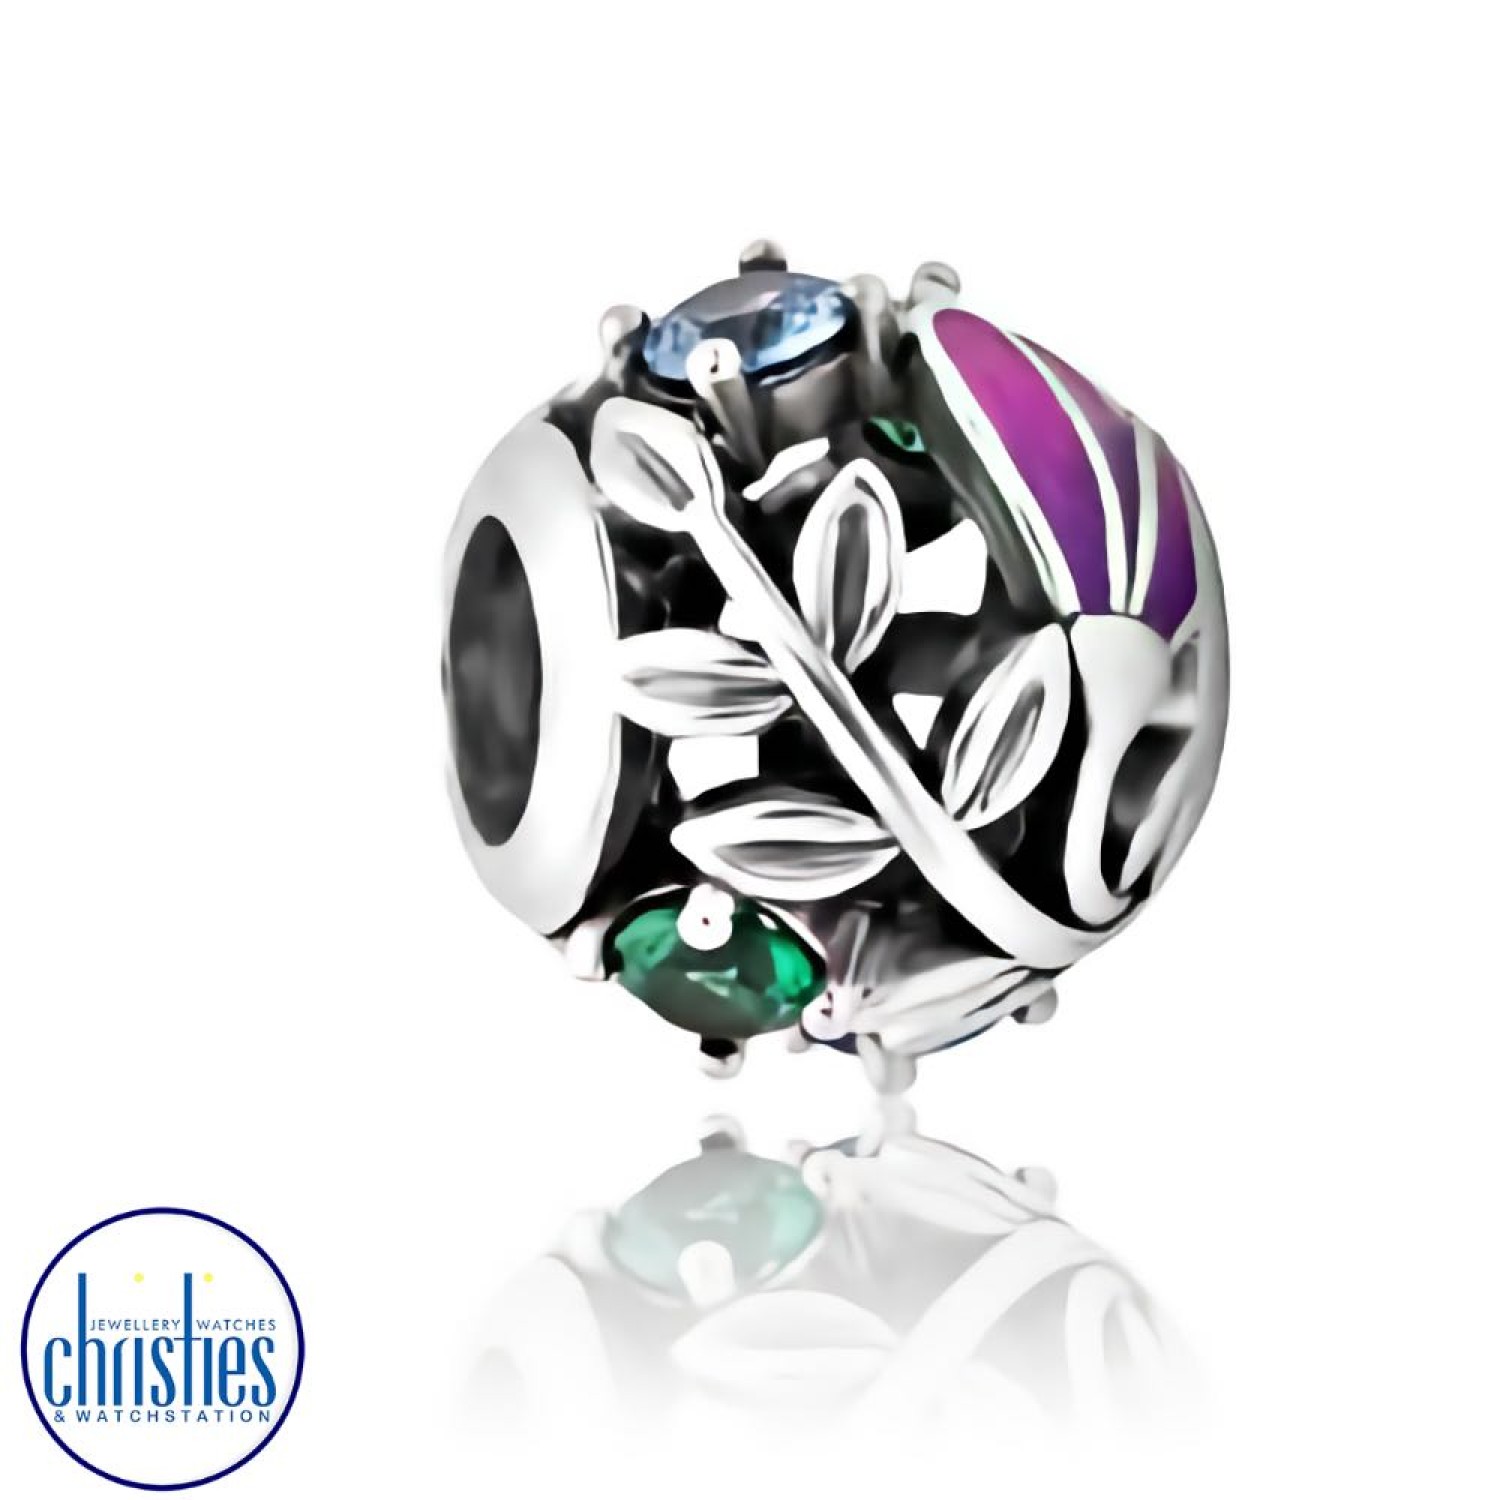 LKE075 Evolve Jewellery Kotukutuku Charm. Popular among New Zealand garden enthusiasts, the kōtukutuku (tree fuchsia) produces nectar rich flowers which attract insects and native birds such as theTui,Tītapu and Pihipihi. Representing the beautiful colo